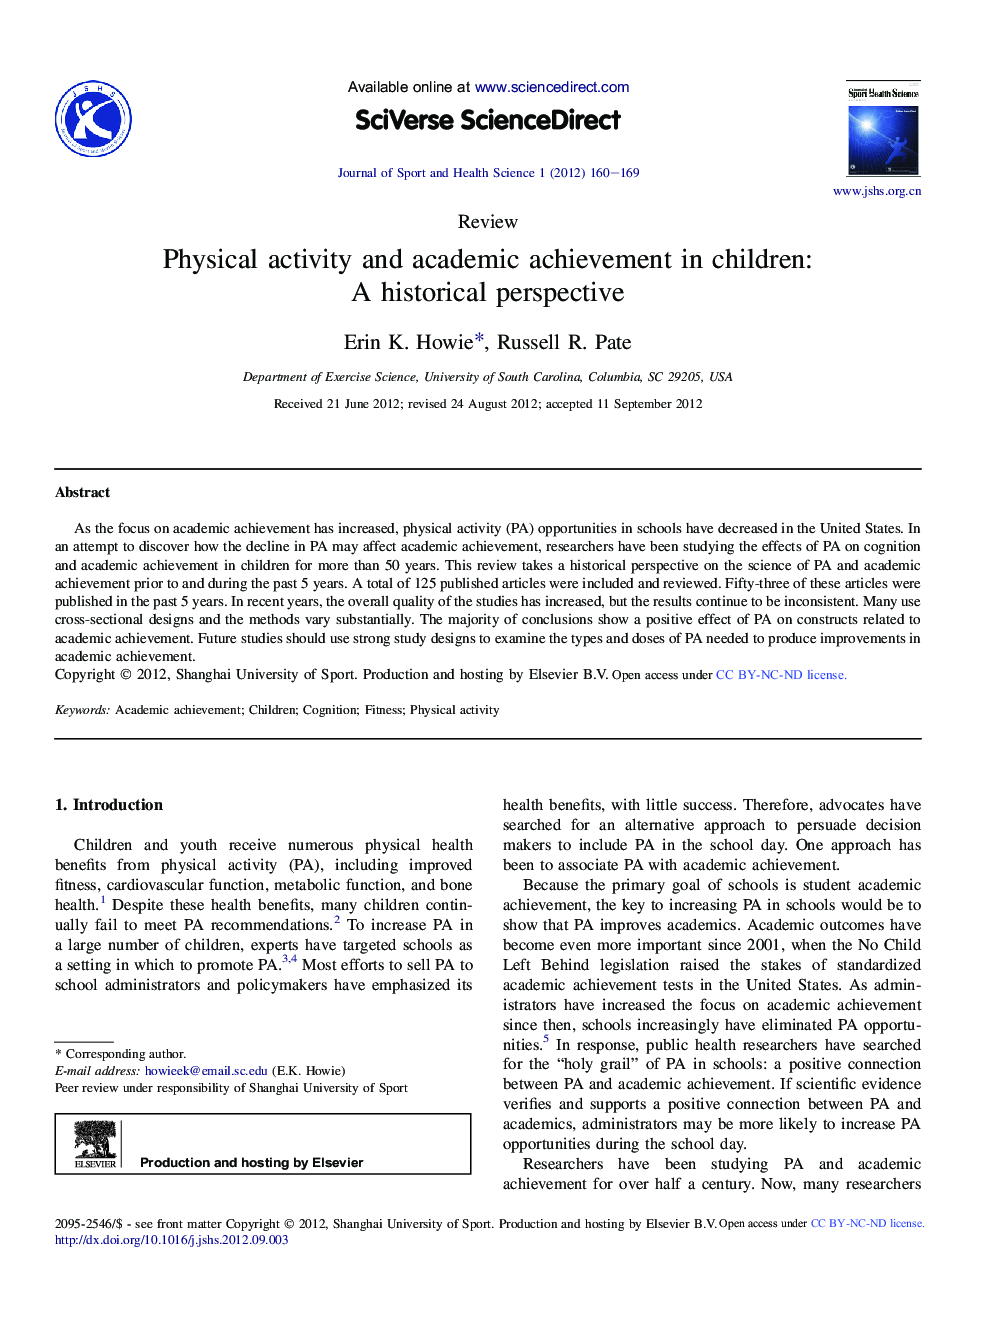 Physical activity and academic achievement in children: A historical perspective 